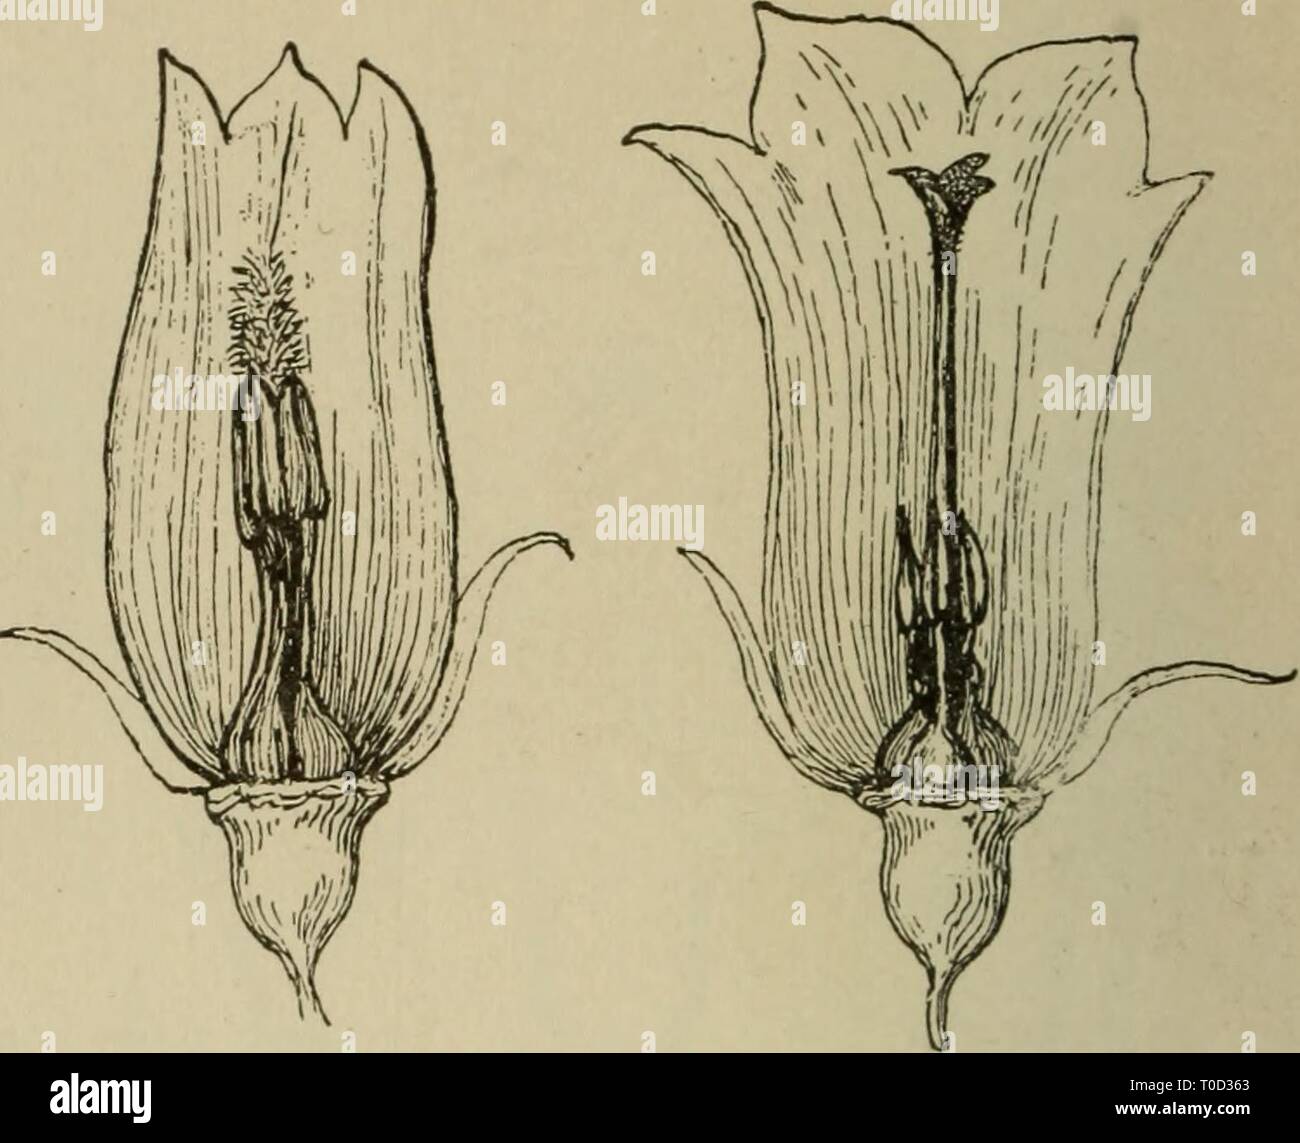 Elementary botany (1898) Elementary botany elementarybotany00atki Year: 1898  Fig- 459- Proterandry in the bell-flower (campanula). Left figure shows the svngencecious stamens surrounding the immature style and stigma. Middle figure shows the immature stigma being pushed through the tube and brushing out the pollen : while in the right-hand figure, after the pollen has disappeared, the lobes of the stigma open out to receive pollen from another flower. the insect, will not touch the stigma of the same flower, but will be in posi- tion to come in contact with the stigma of the next flower visit Stock Photo